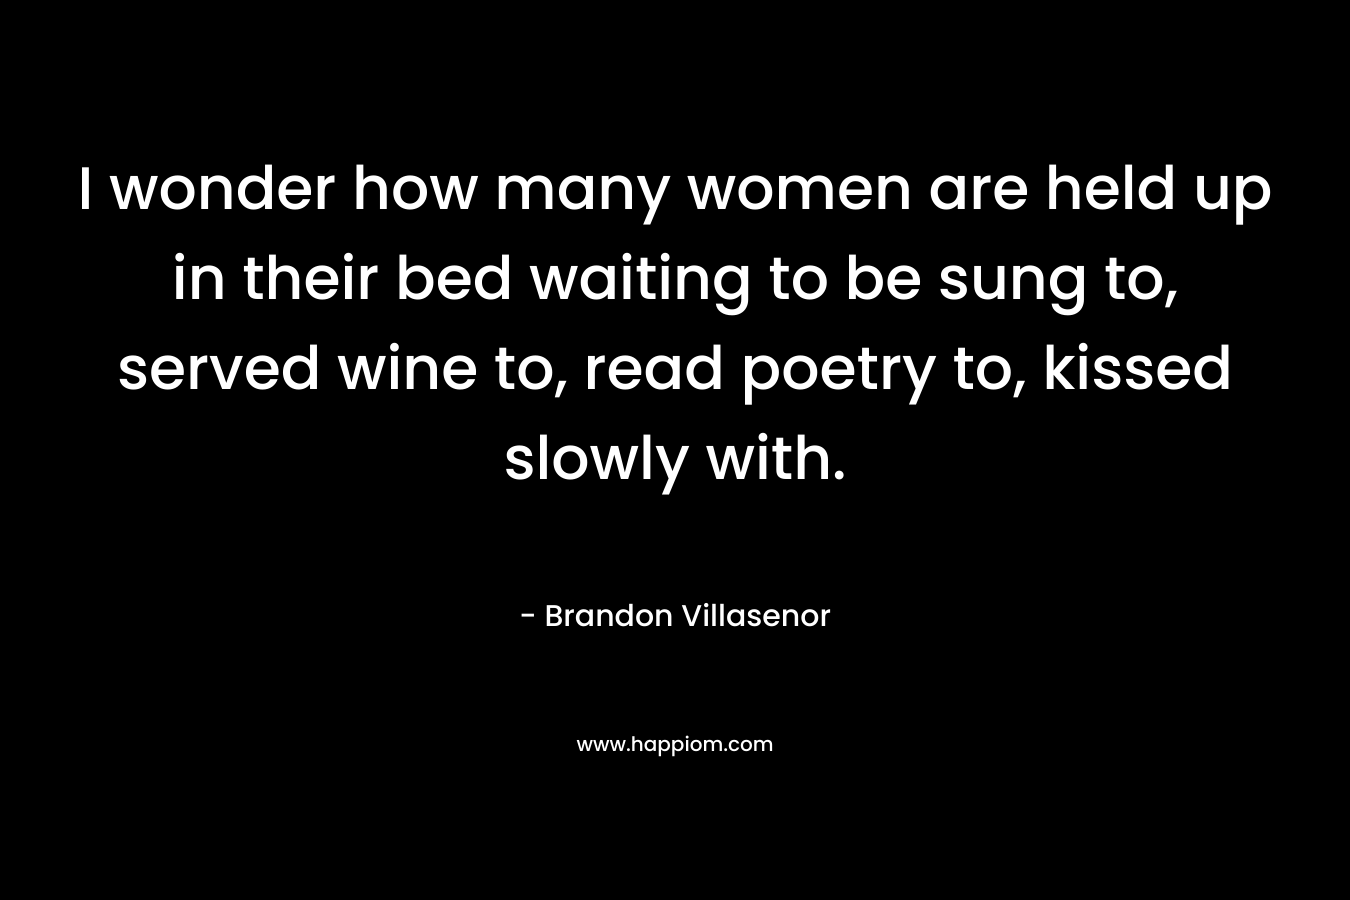 I wonder how many women are held up in their bed waiting to be sung to, served wine to, read poetry to, kissed slowly with. – Brandon Villasenor